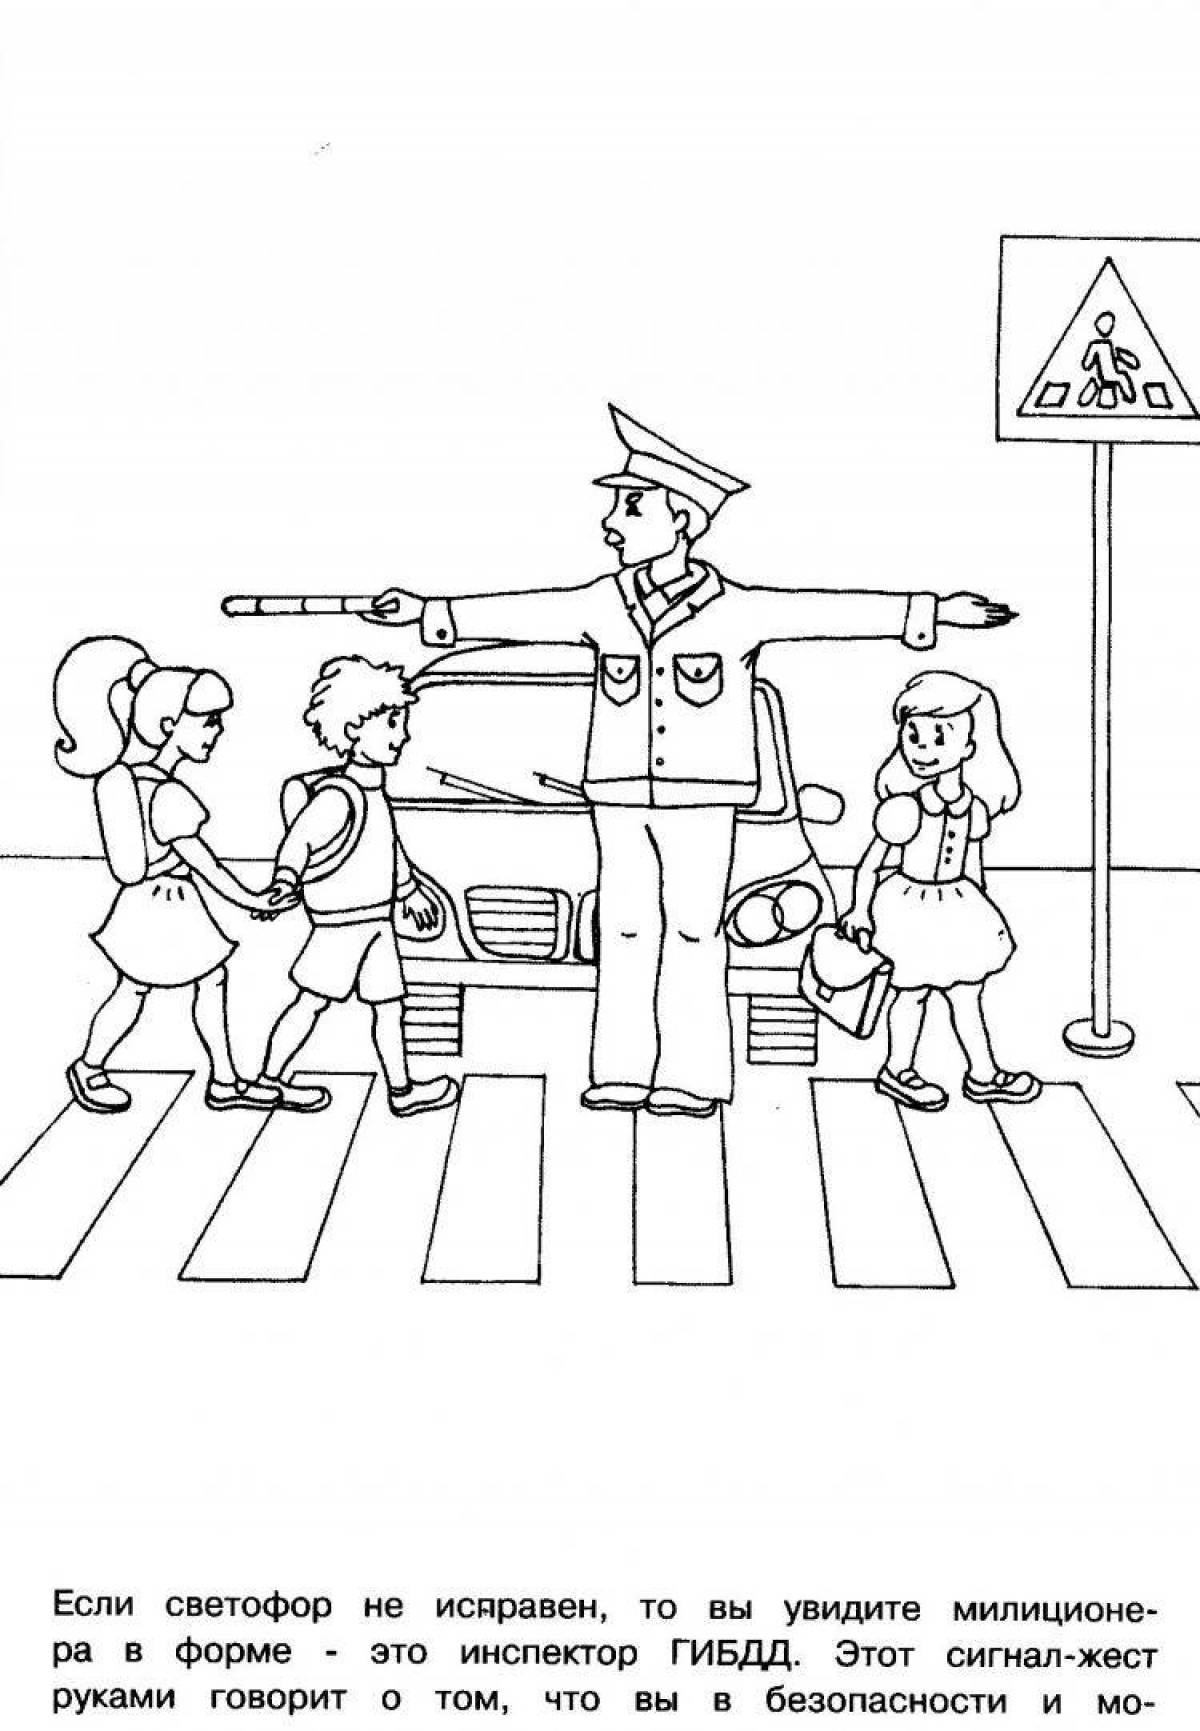 Interactive traffic rules coloring book for schoolchildren